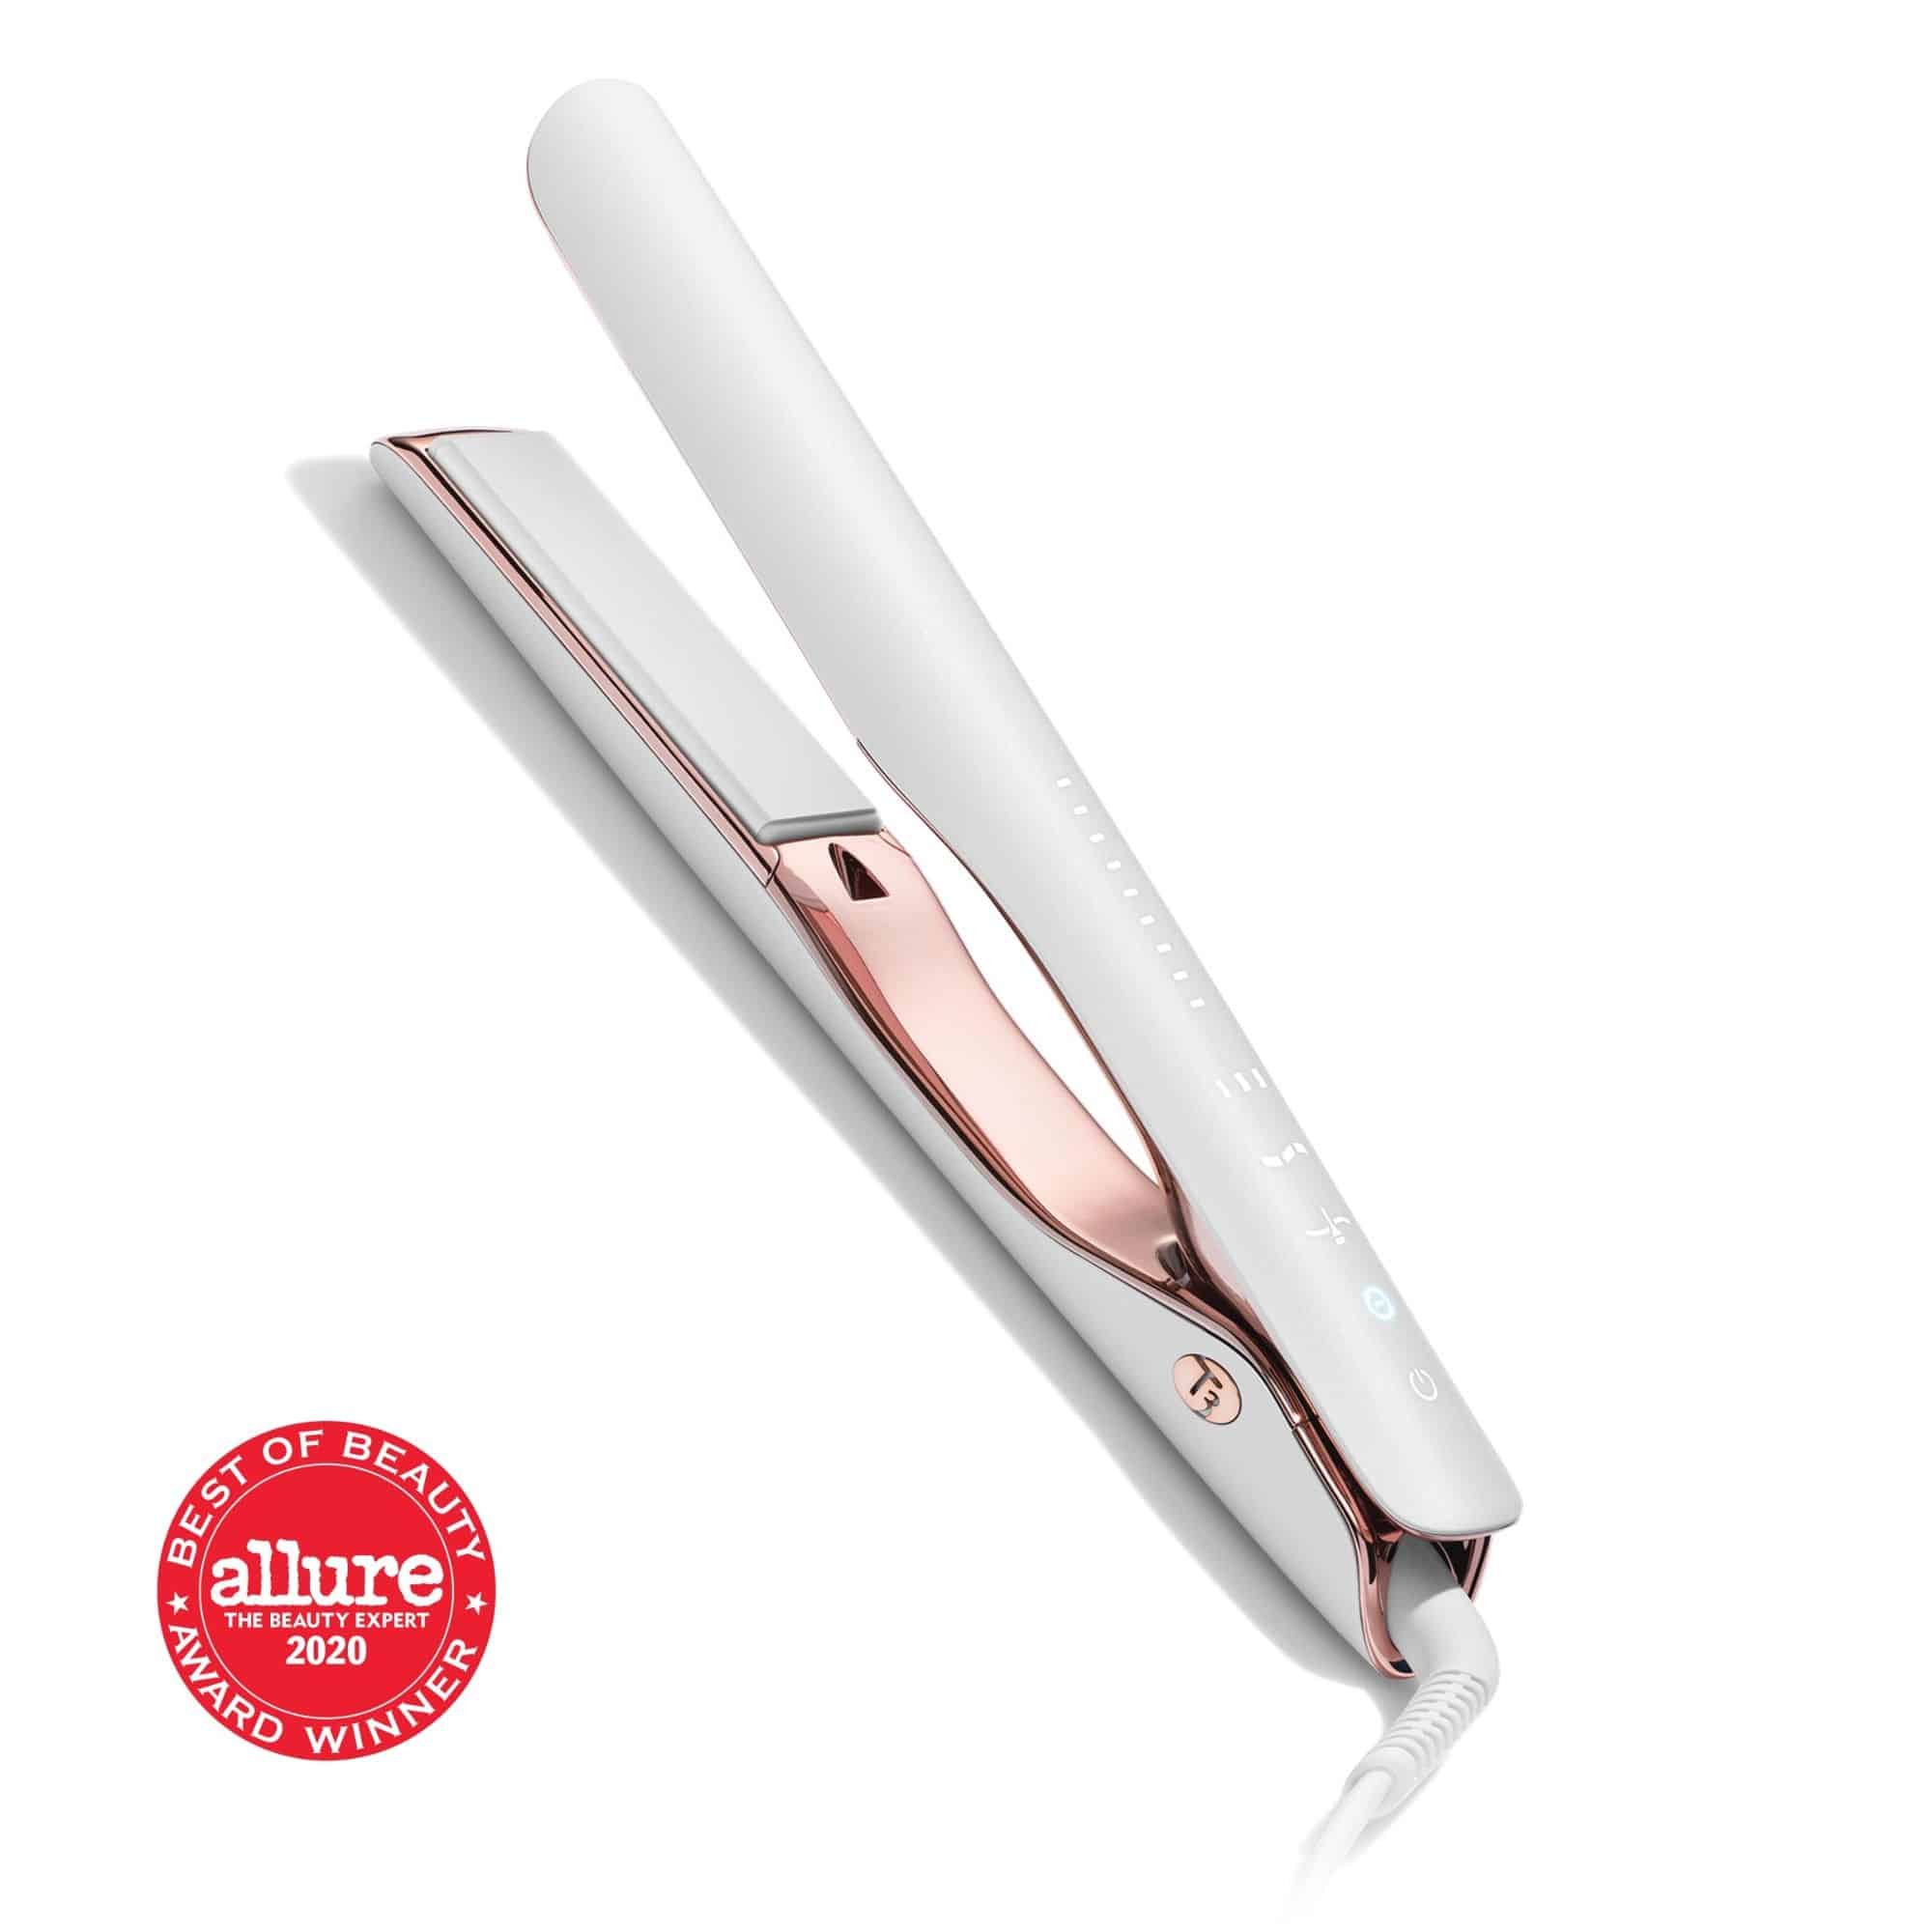 T3 Lucea ID Straightening And Styling Iron